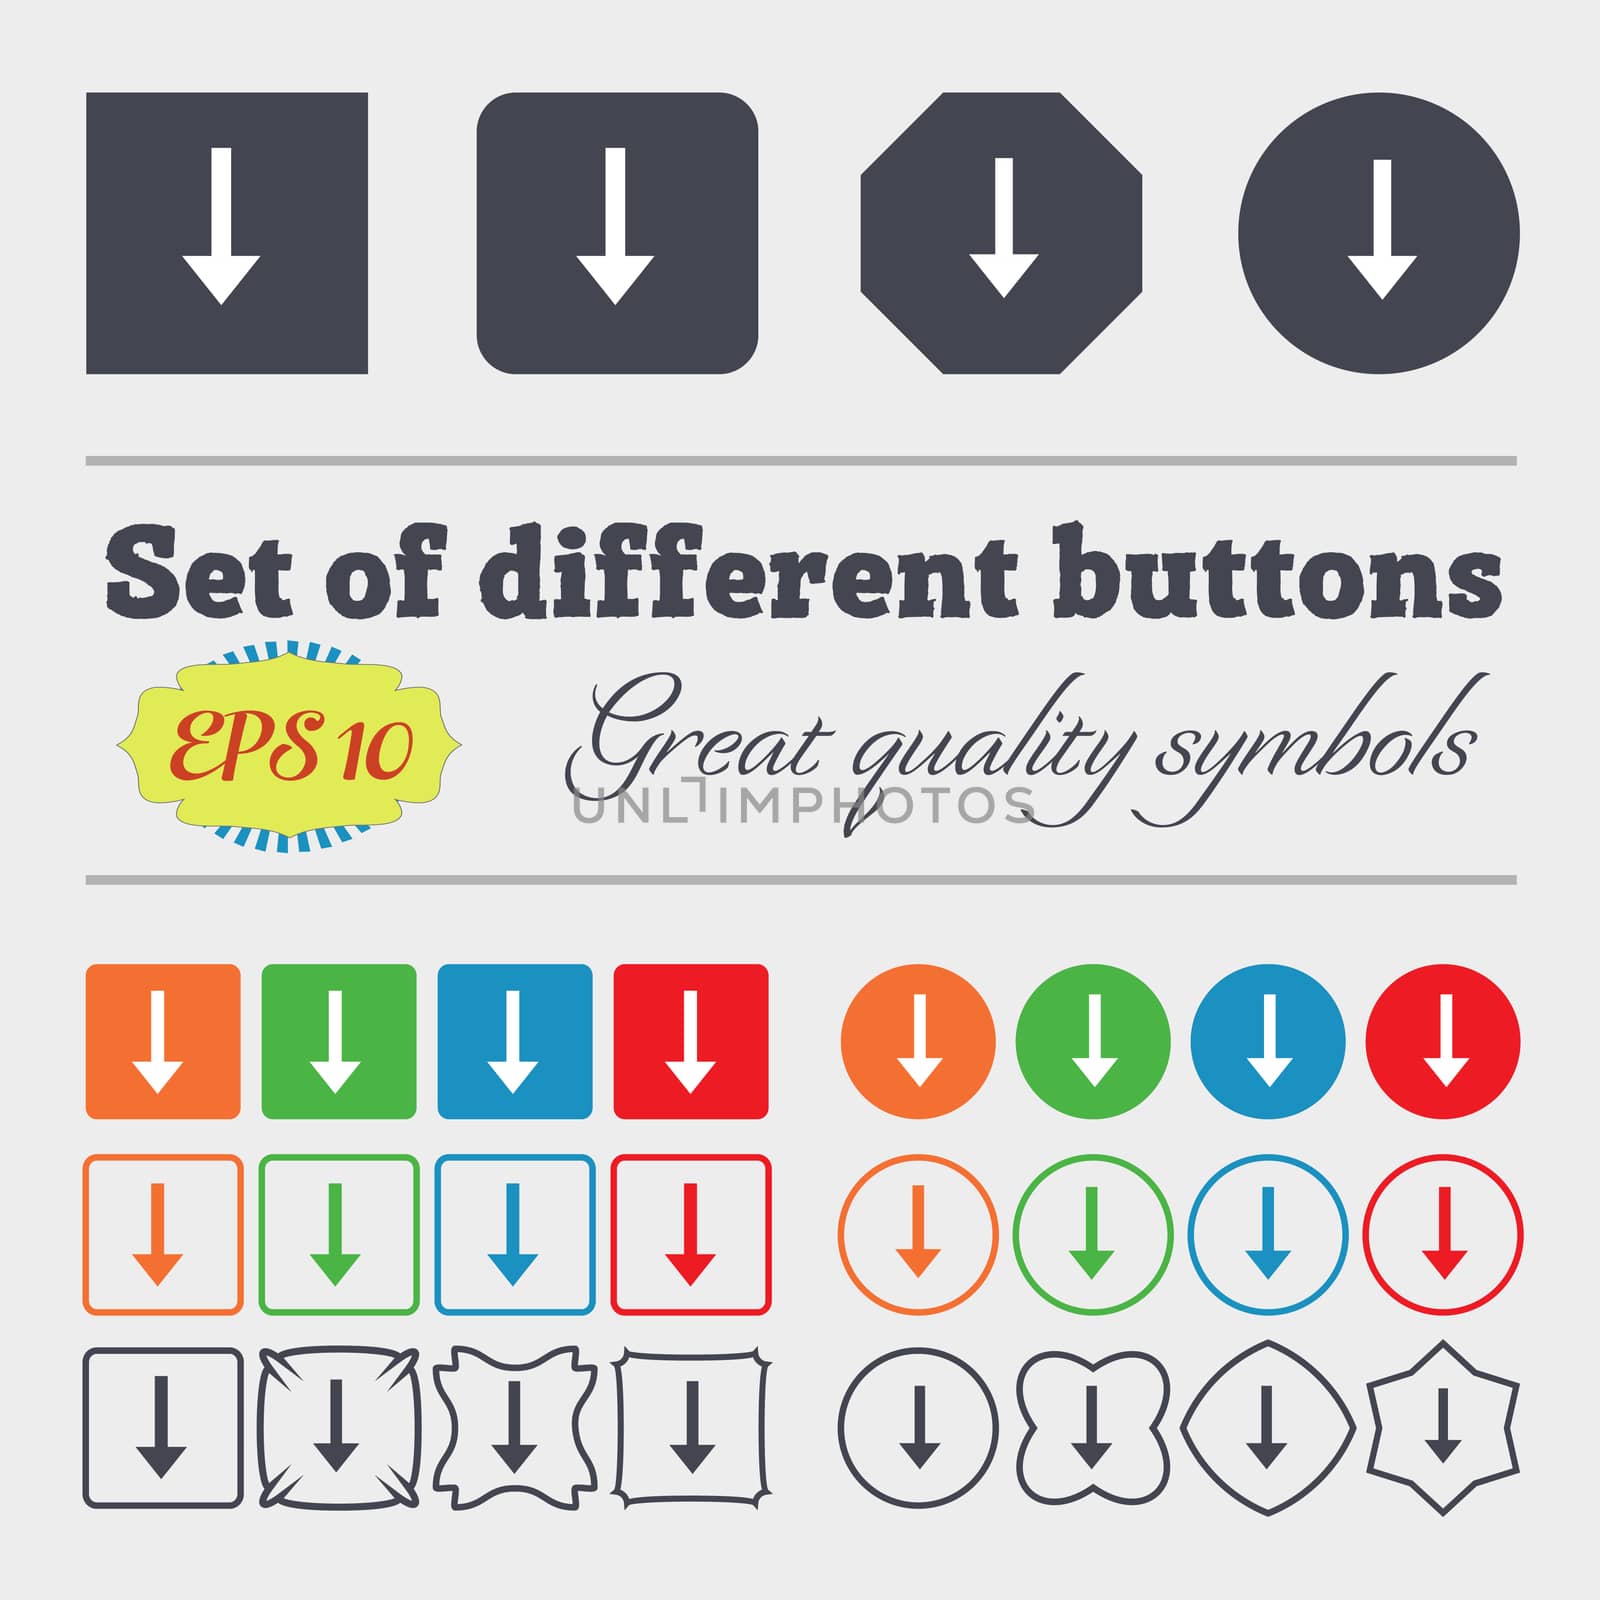 Arrow down, Download, Load, Backup icon sign Big set of colorful, diverse, high-quality buttons. illustration